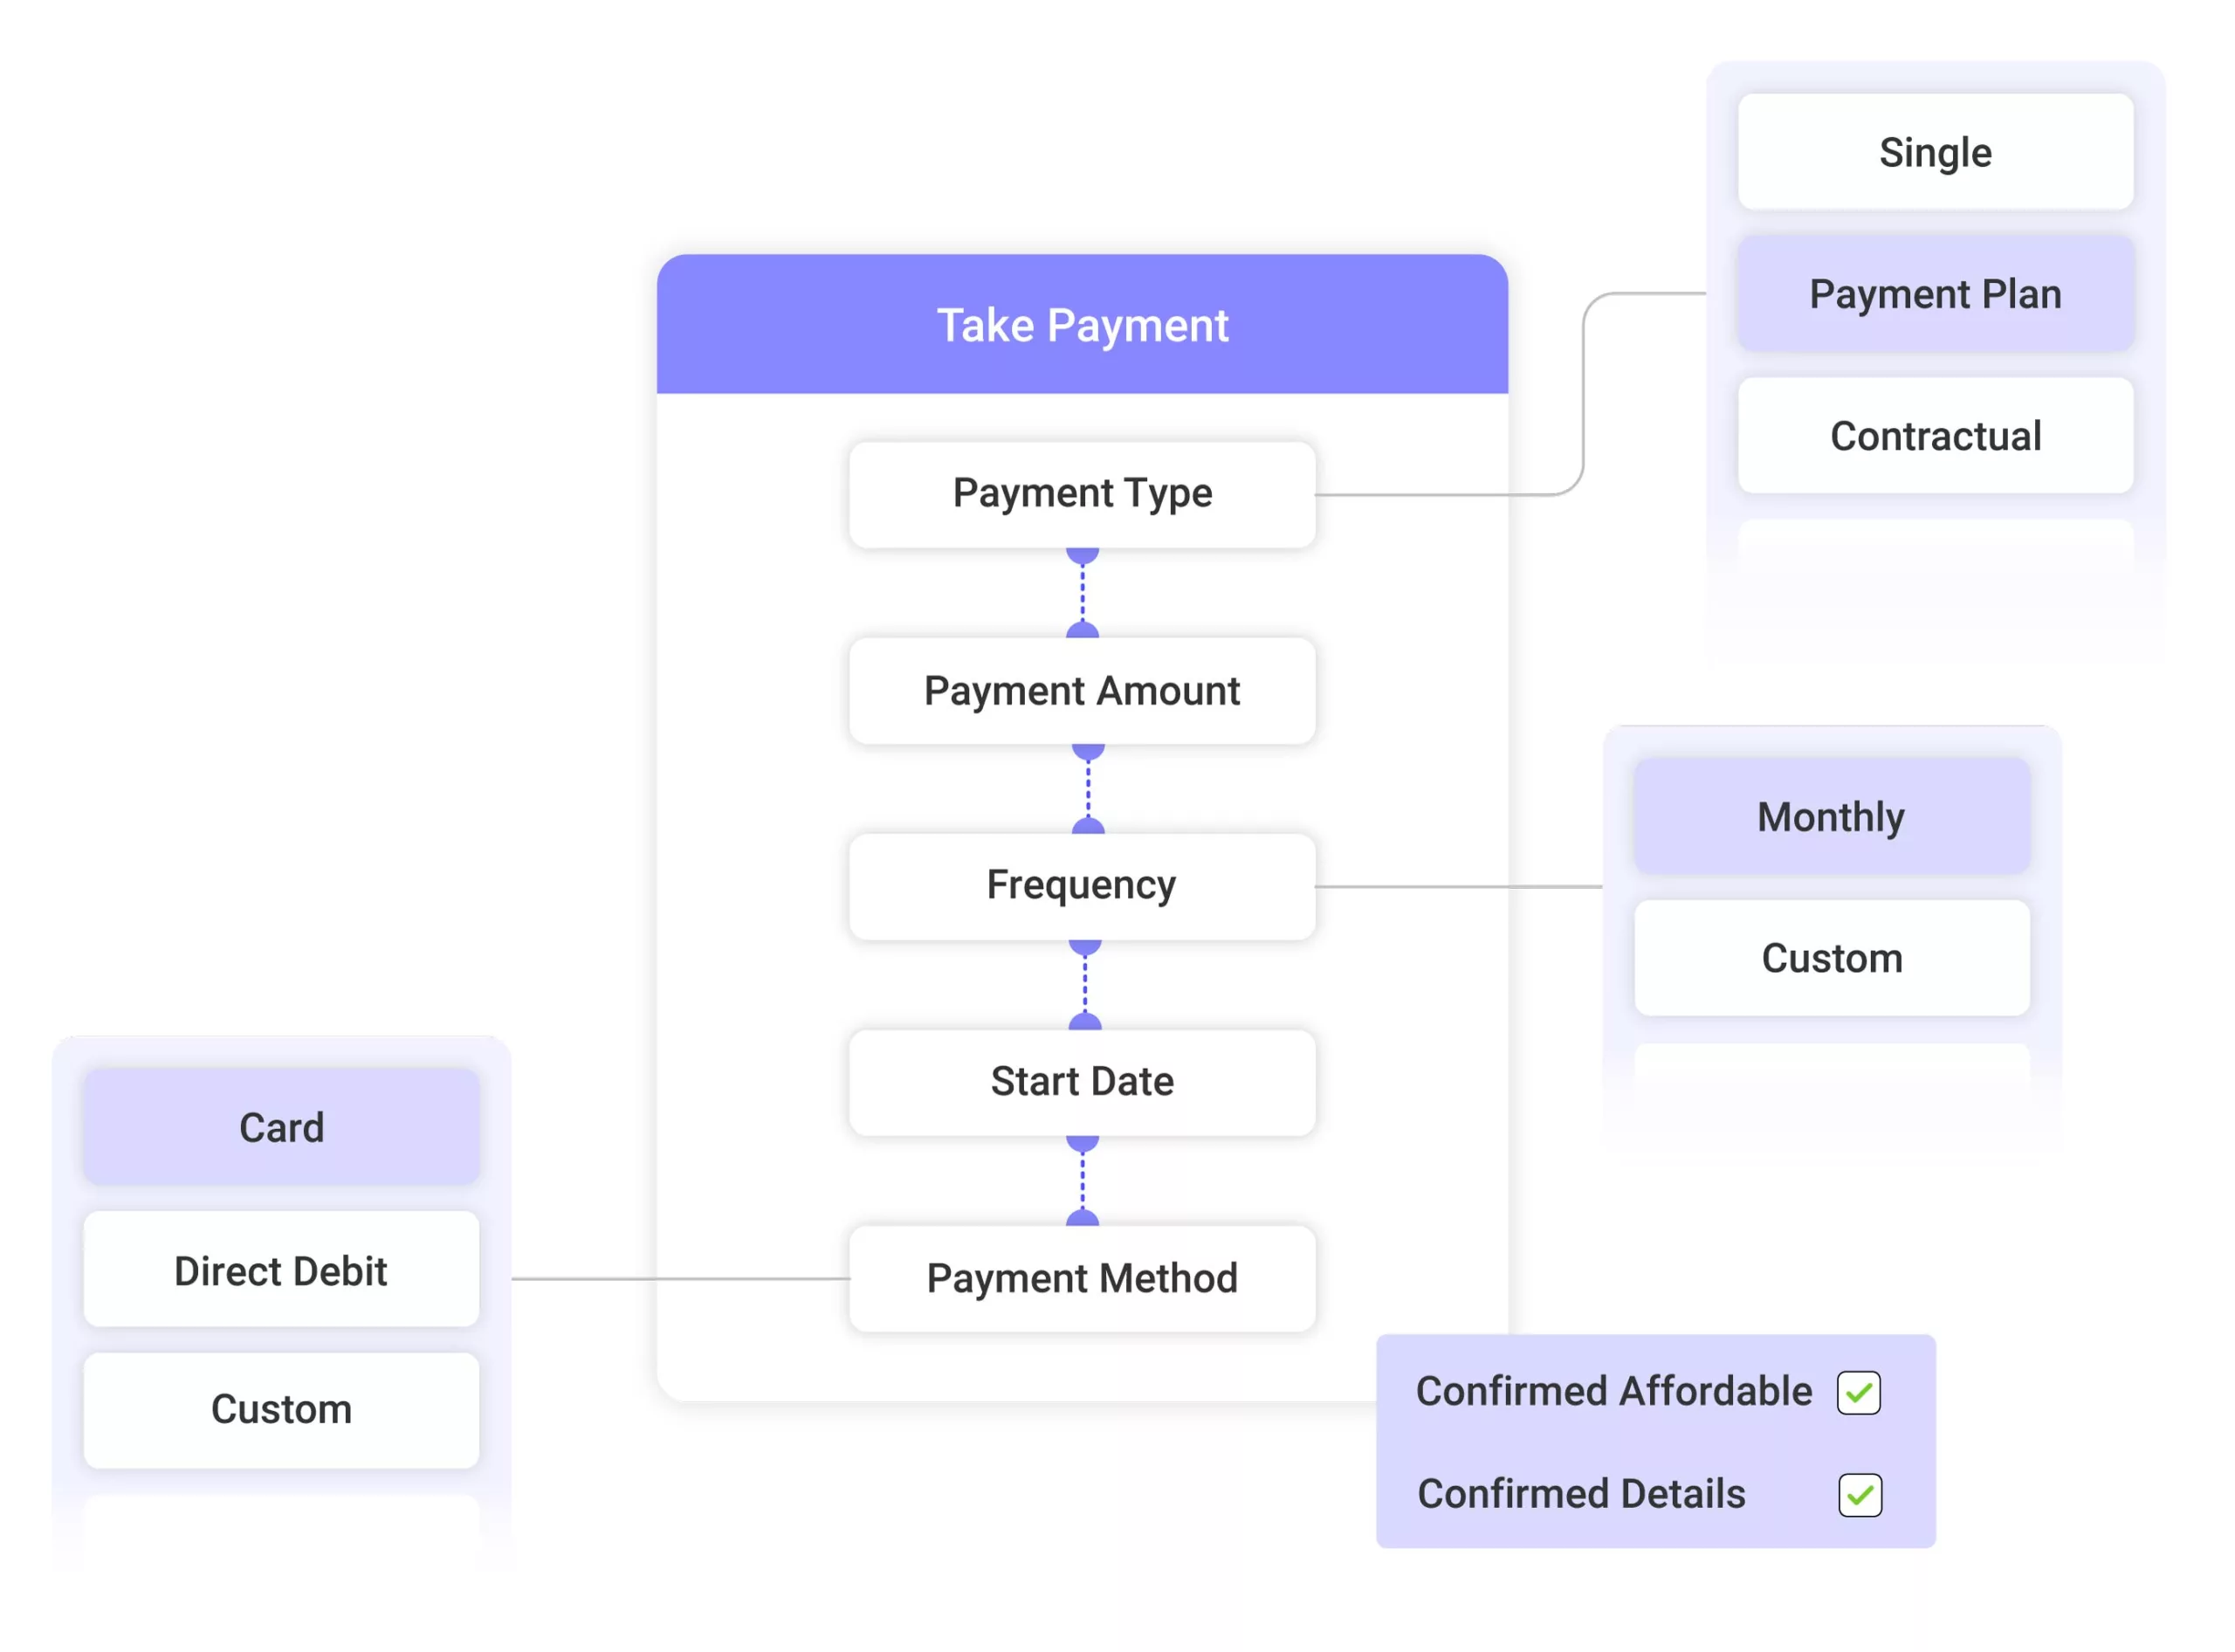 Fully automated payment management
